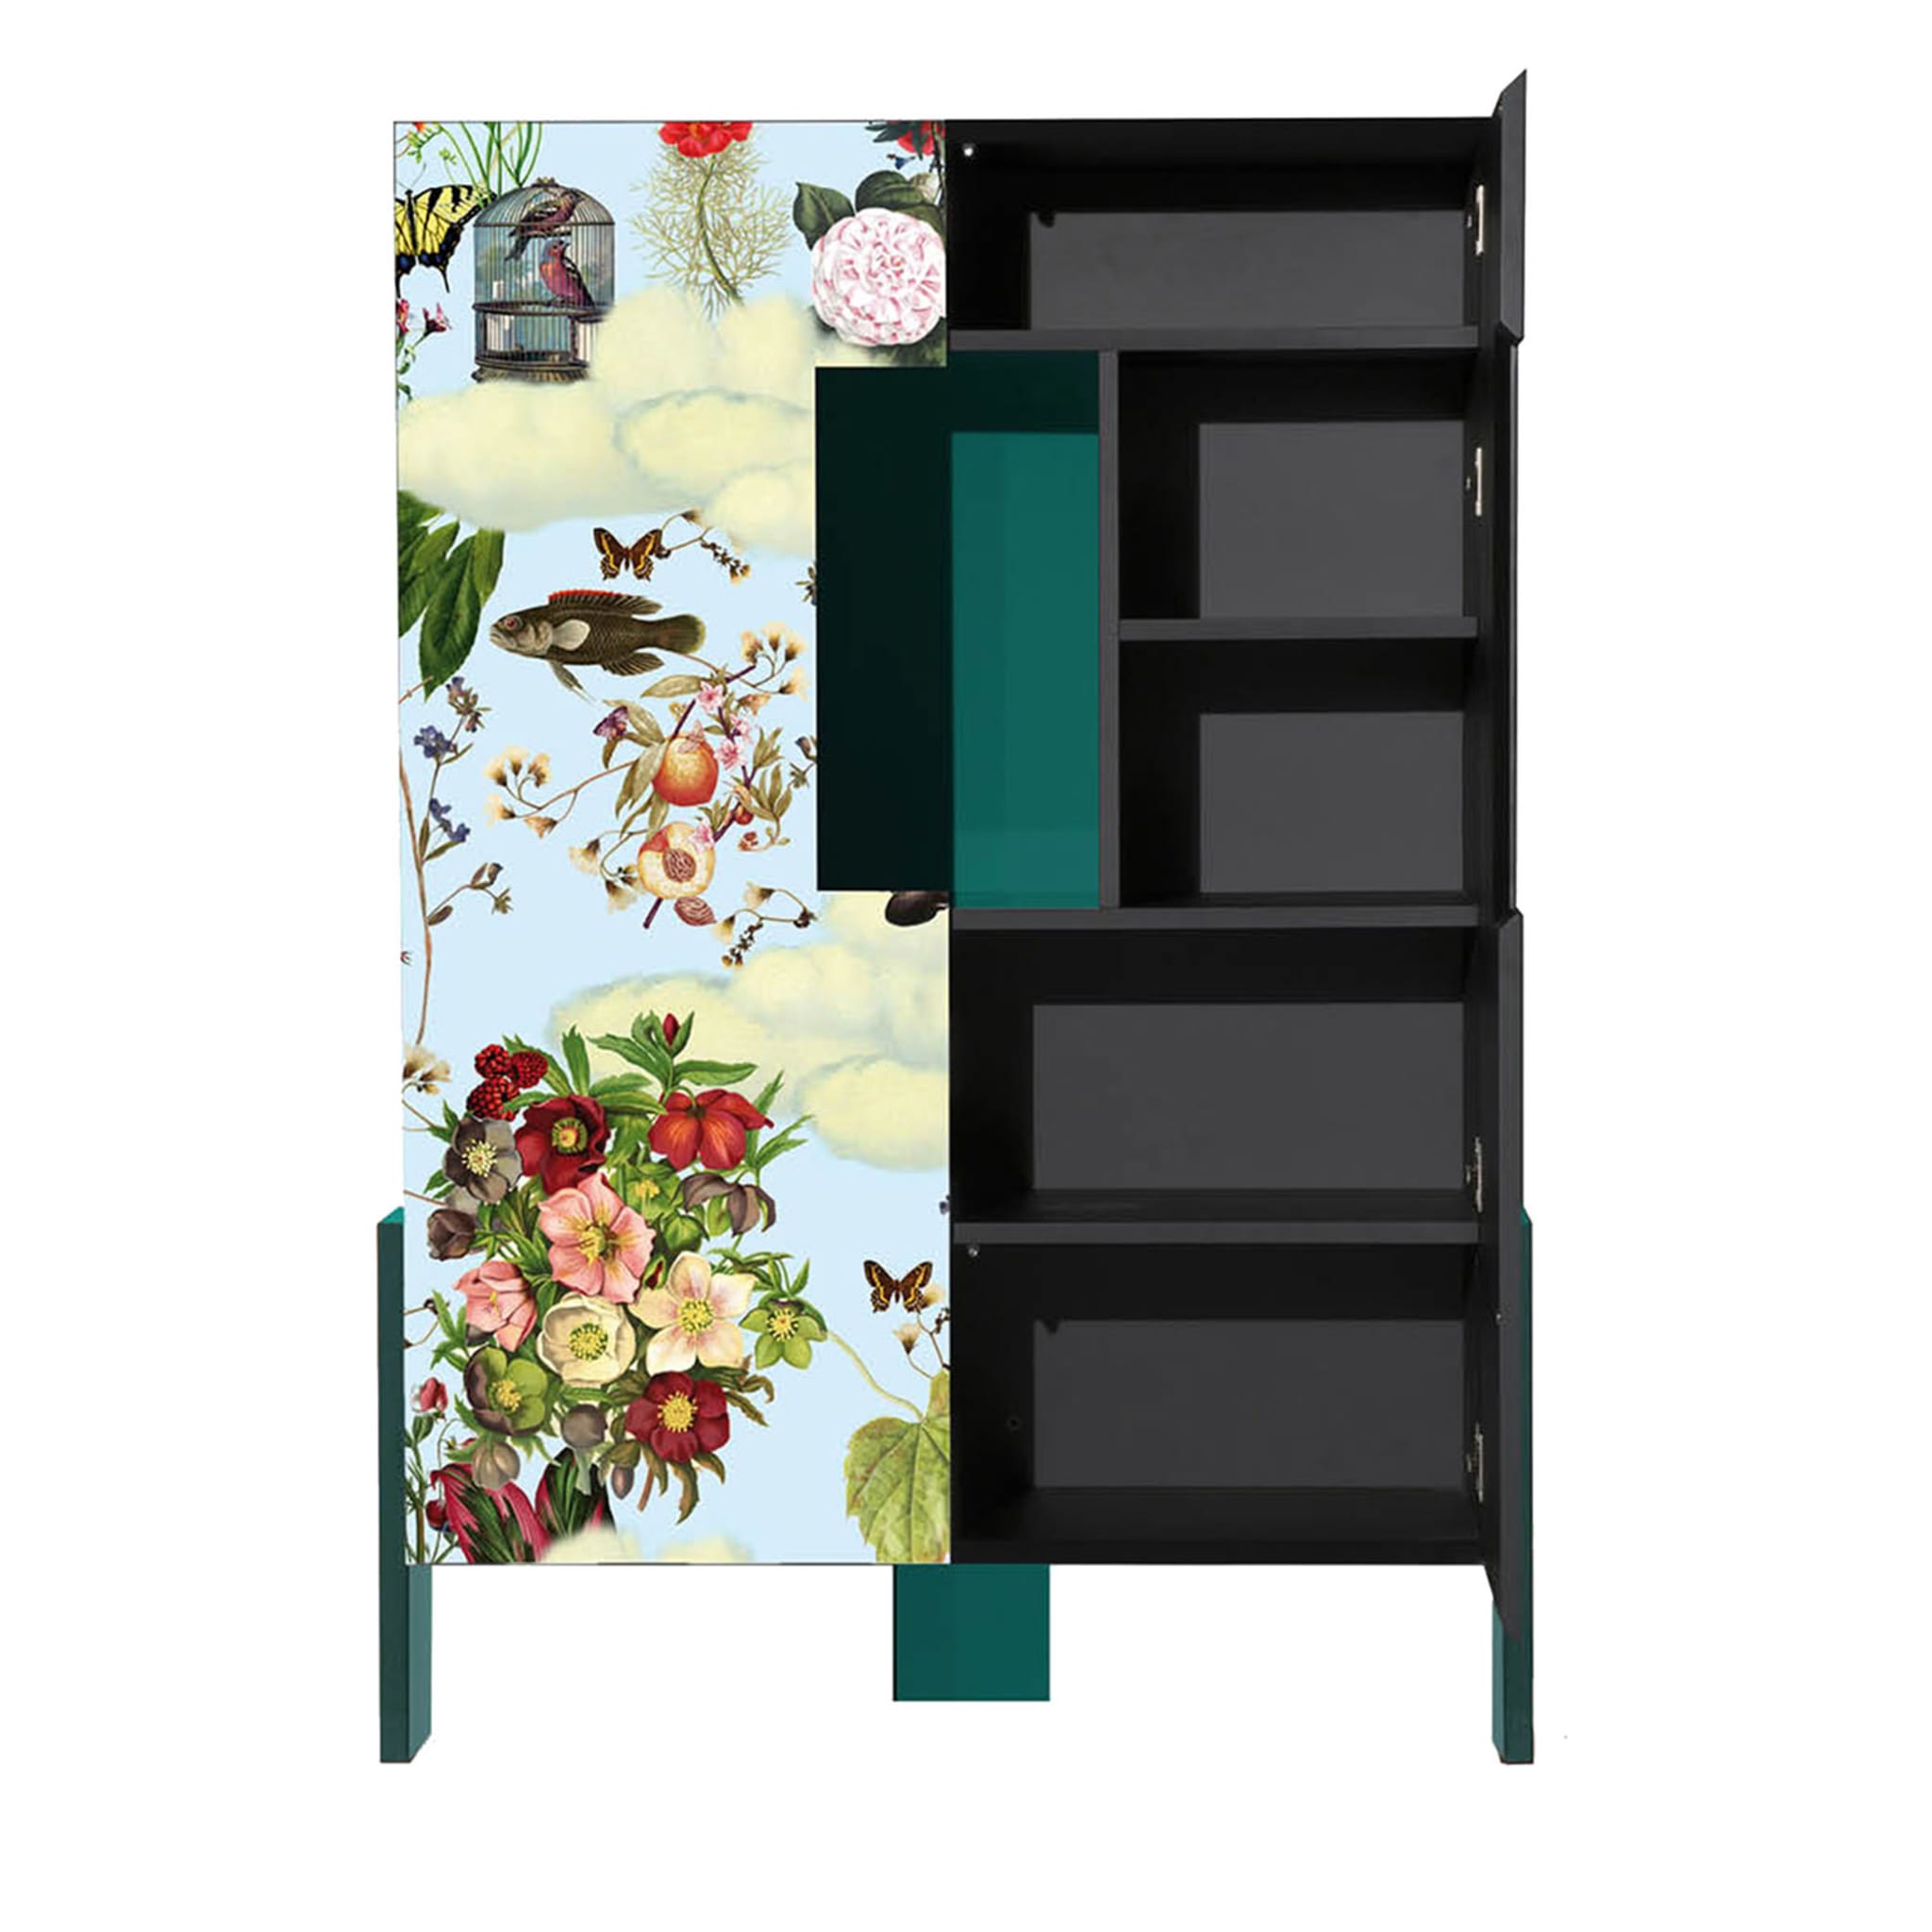 Ziqqurat Floral Polychrome Cabinet by Driade Lab #2 - Main view